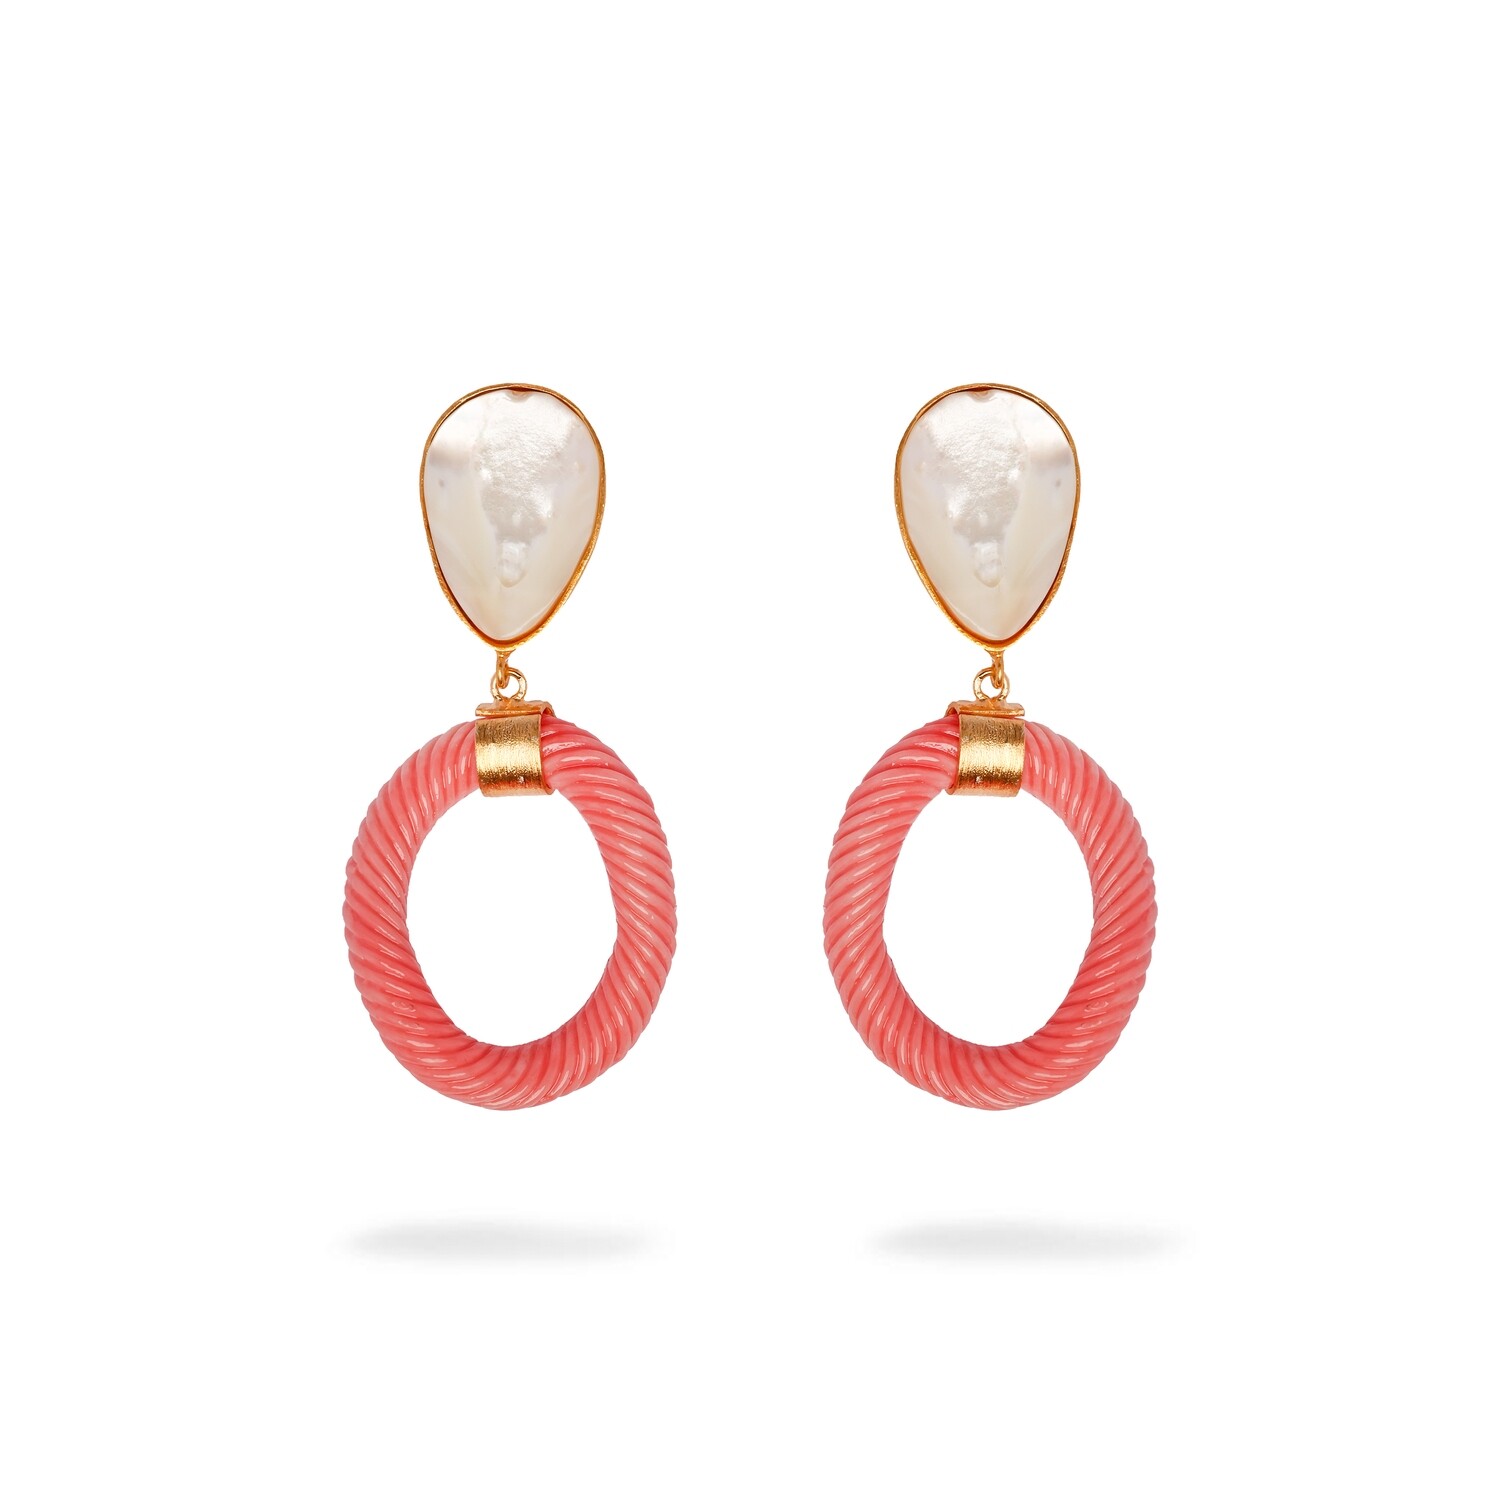 MARSEILLE in Coral and Mother of Pearls gemstones